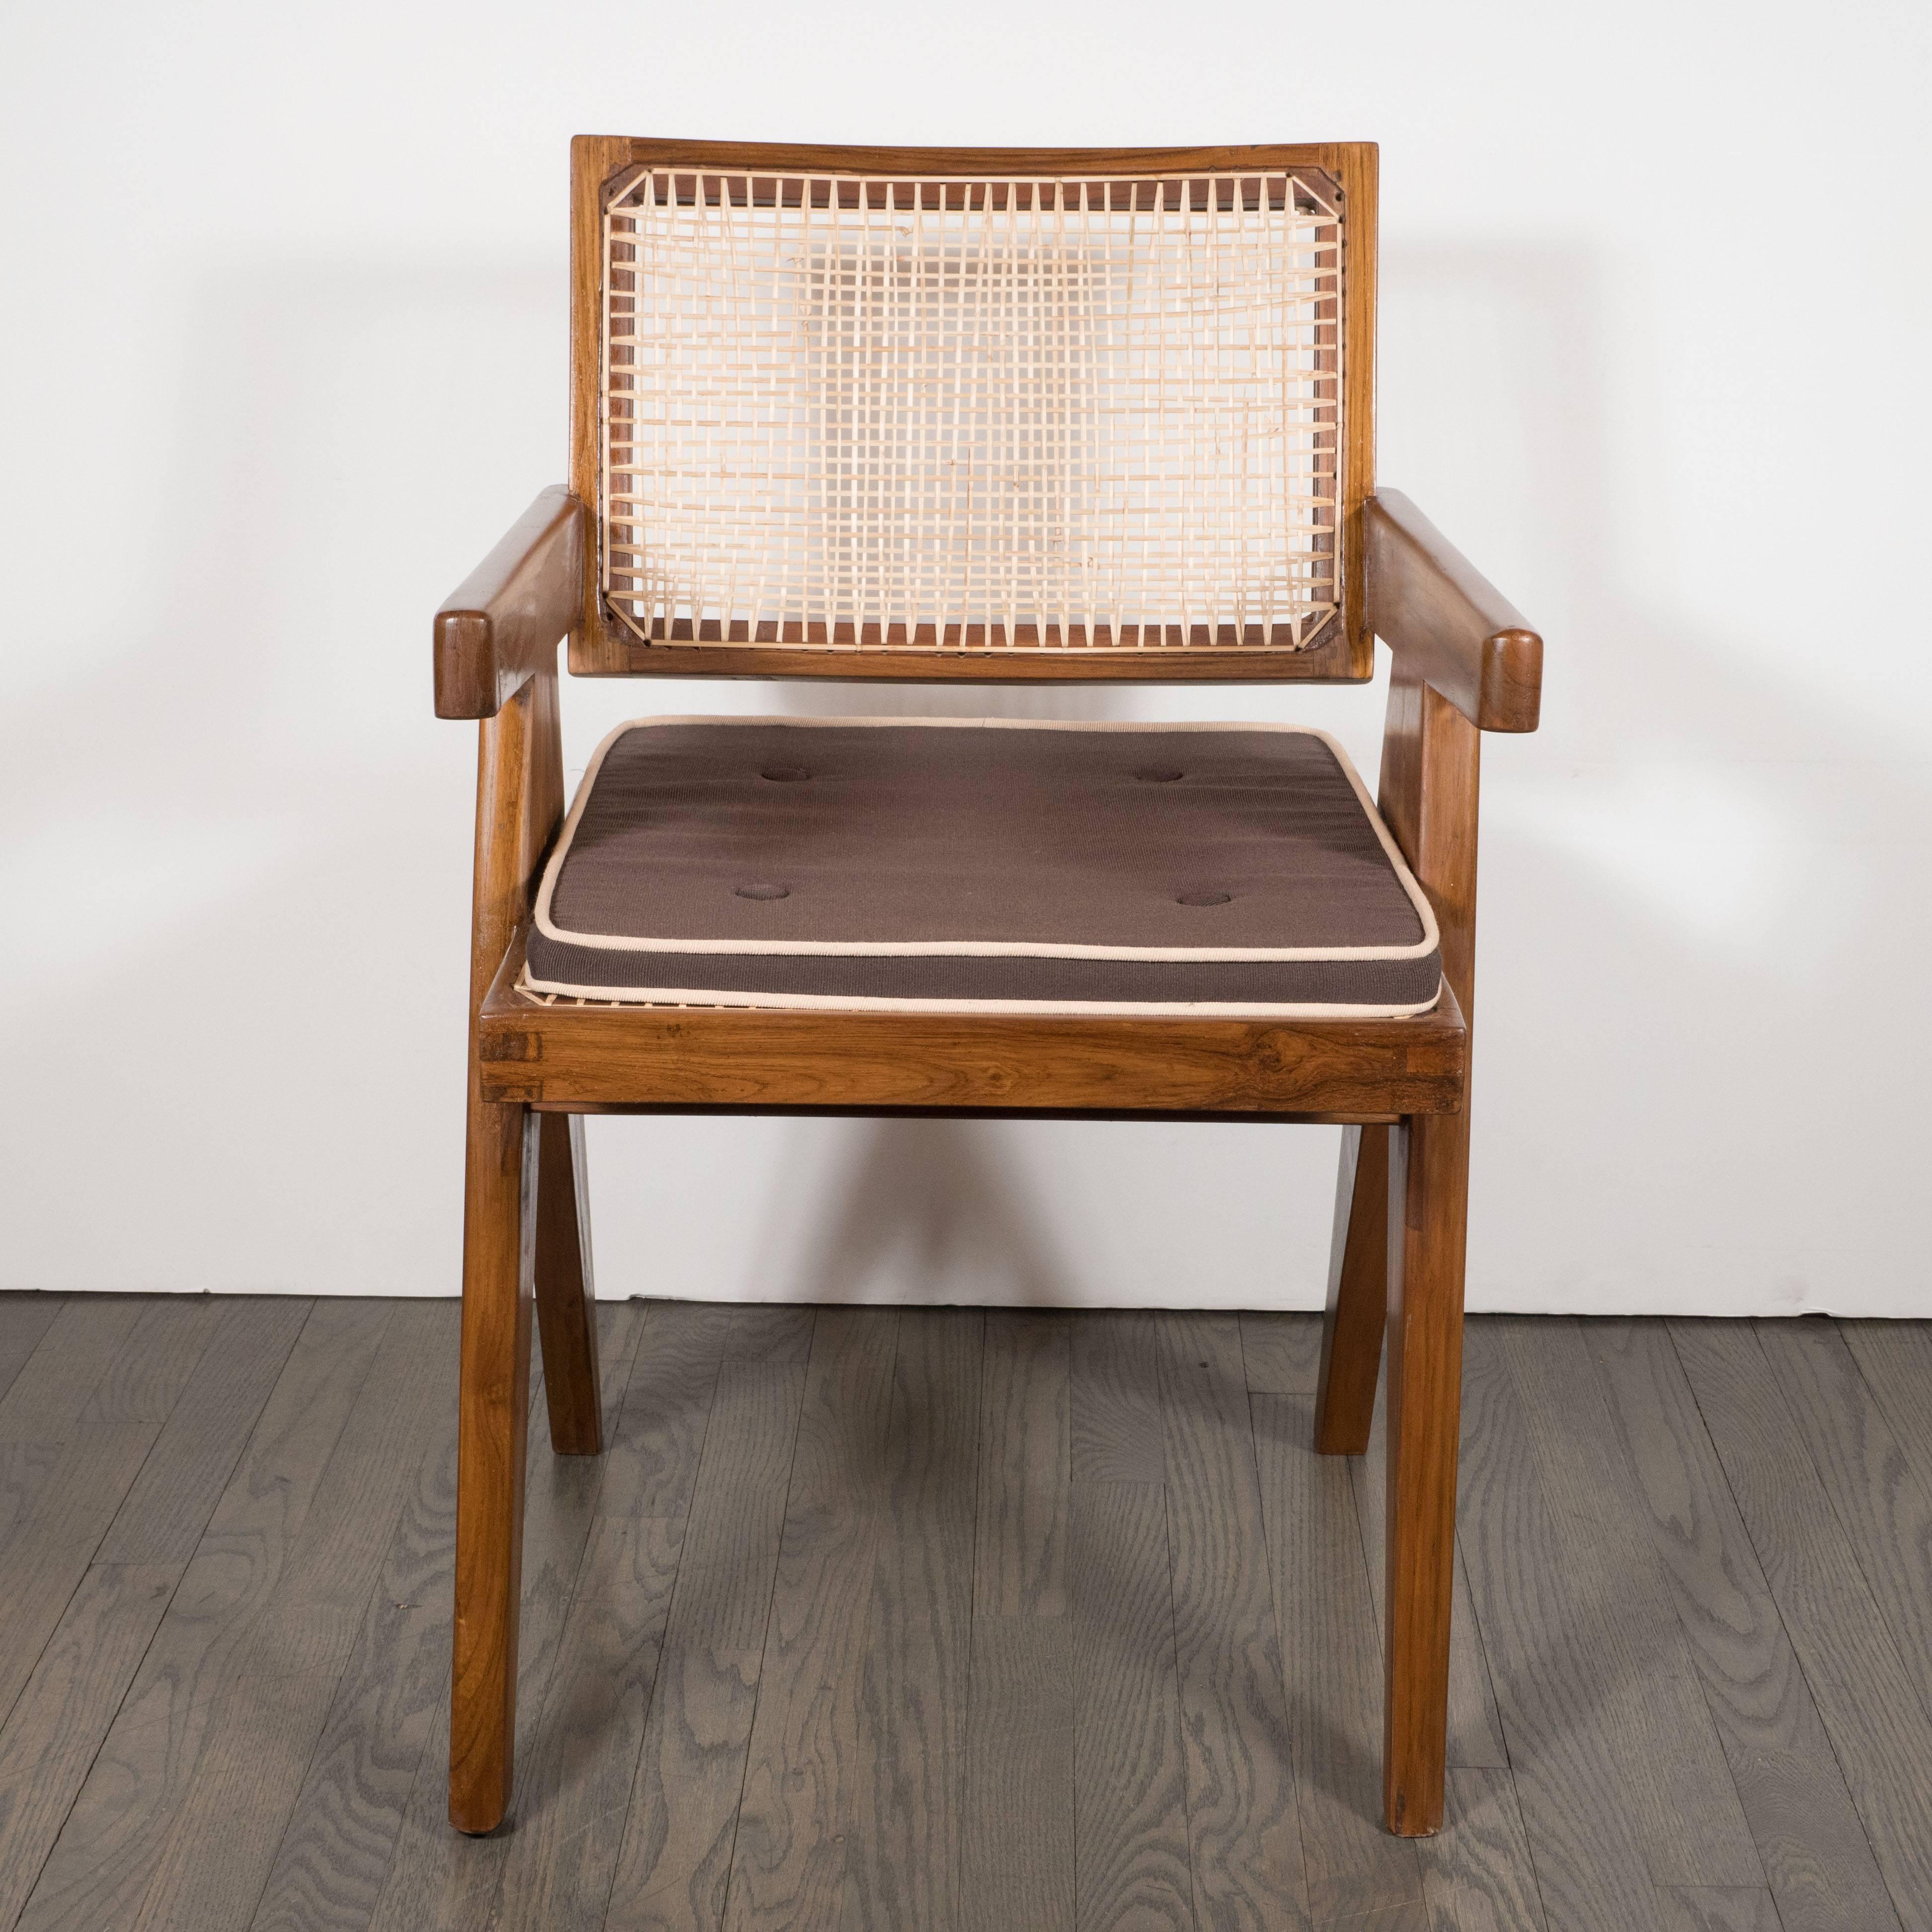 A pair of Mid-Century modernist armchairs in teak, caning and upholstery by Pierre Jeanneret, from the Chandigarh administrative buildings, model PJ-SI-28-A. A caned seat and seat-back is supported by solid teak mortis and tenon frame. Splayed legs